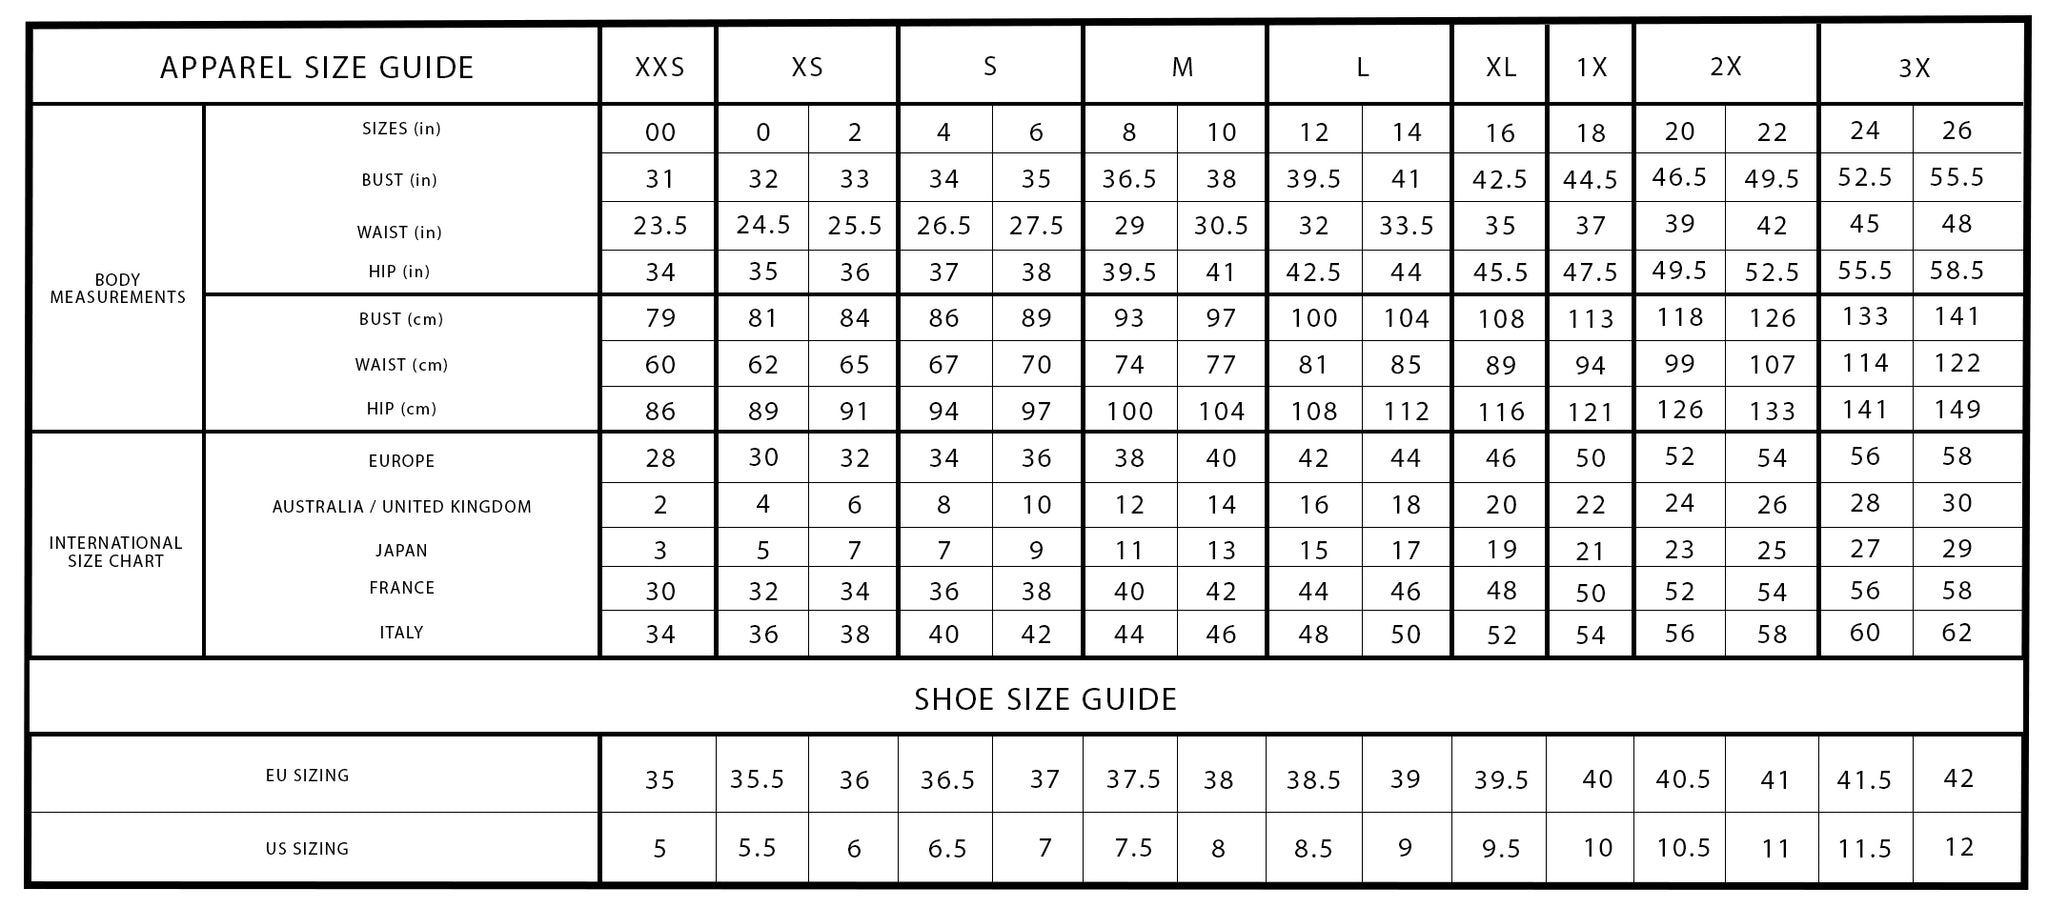 Staud size guide